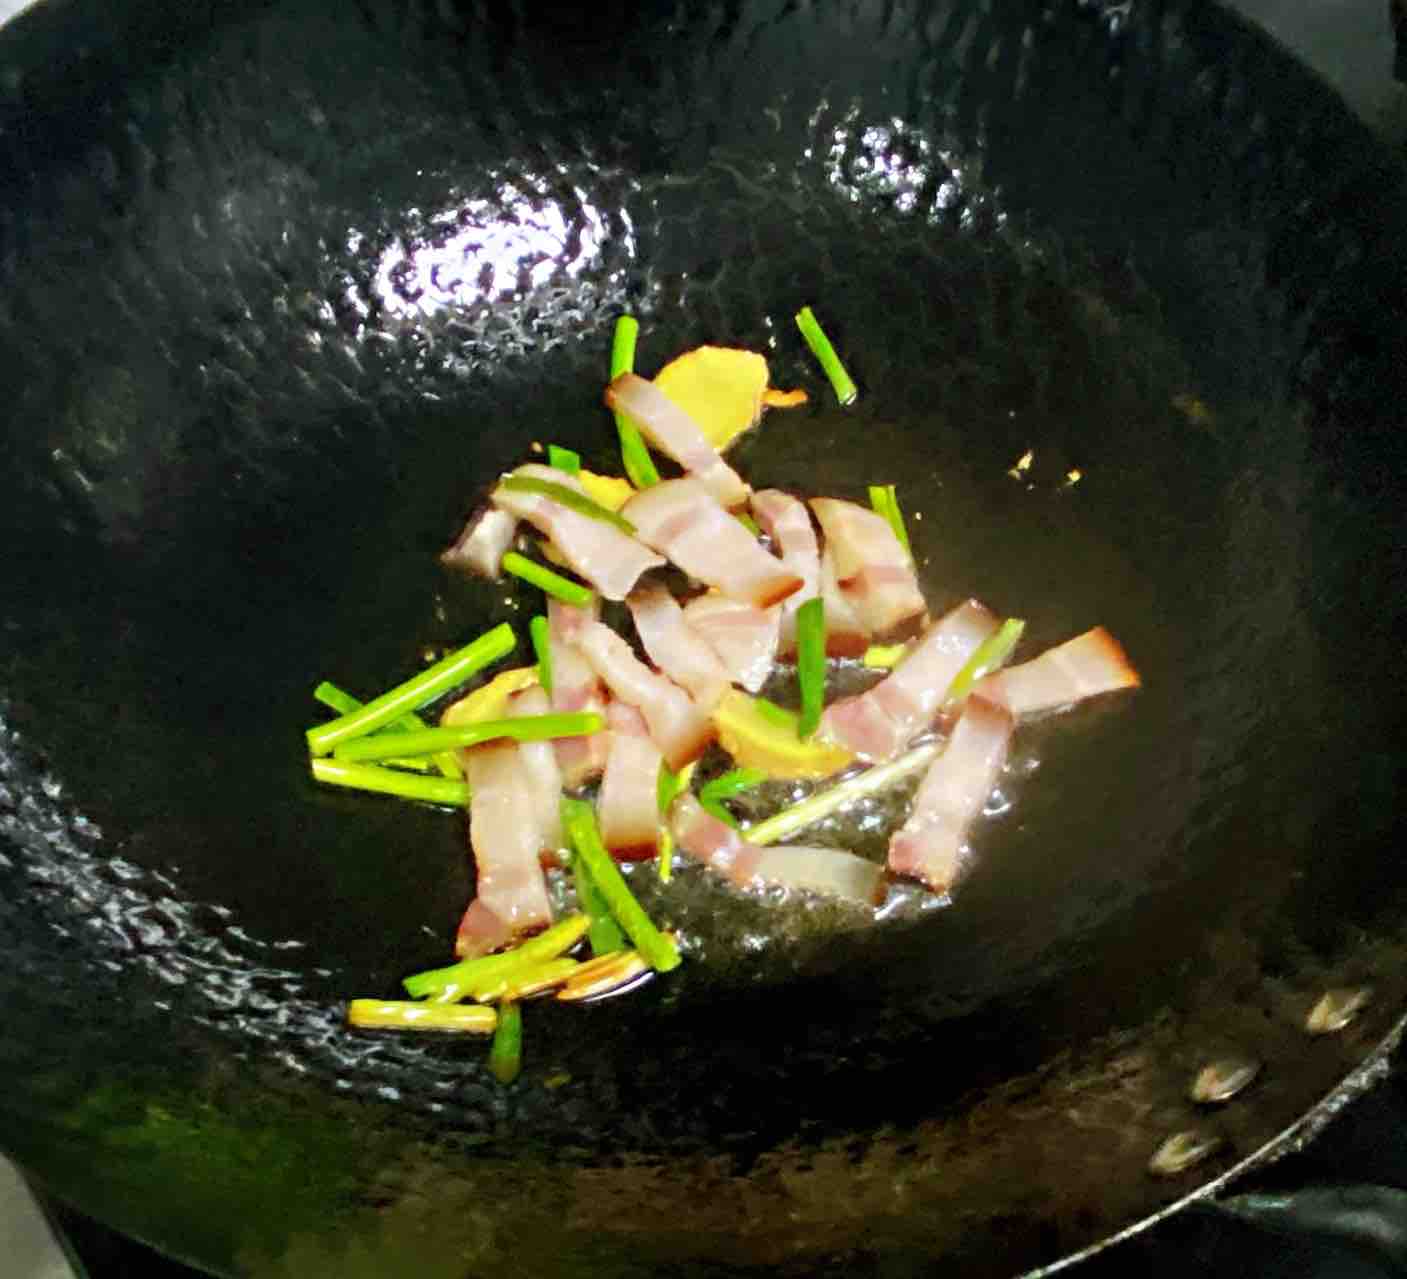 [recipe for Pregnant Women] Stir-fried Snow Peas with Bacon and Eryngii Mushrooms, The Taste is Strong recipe